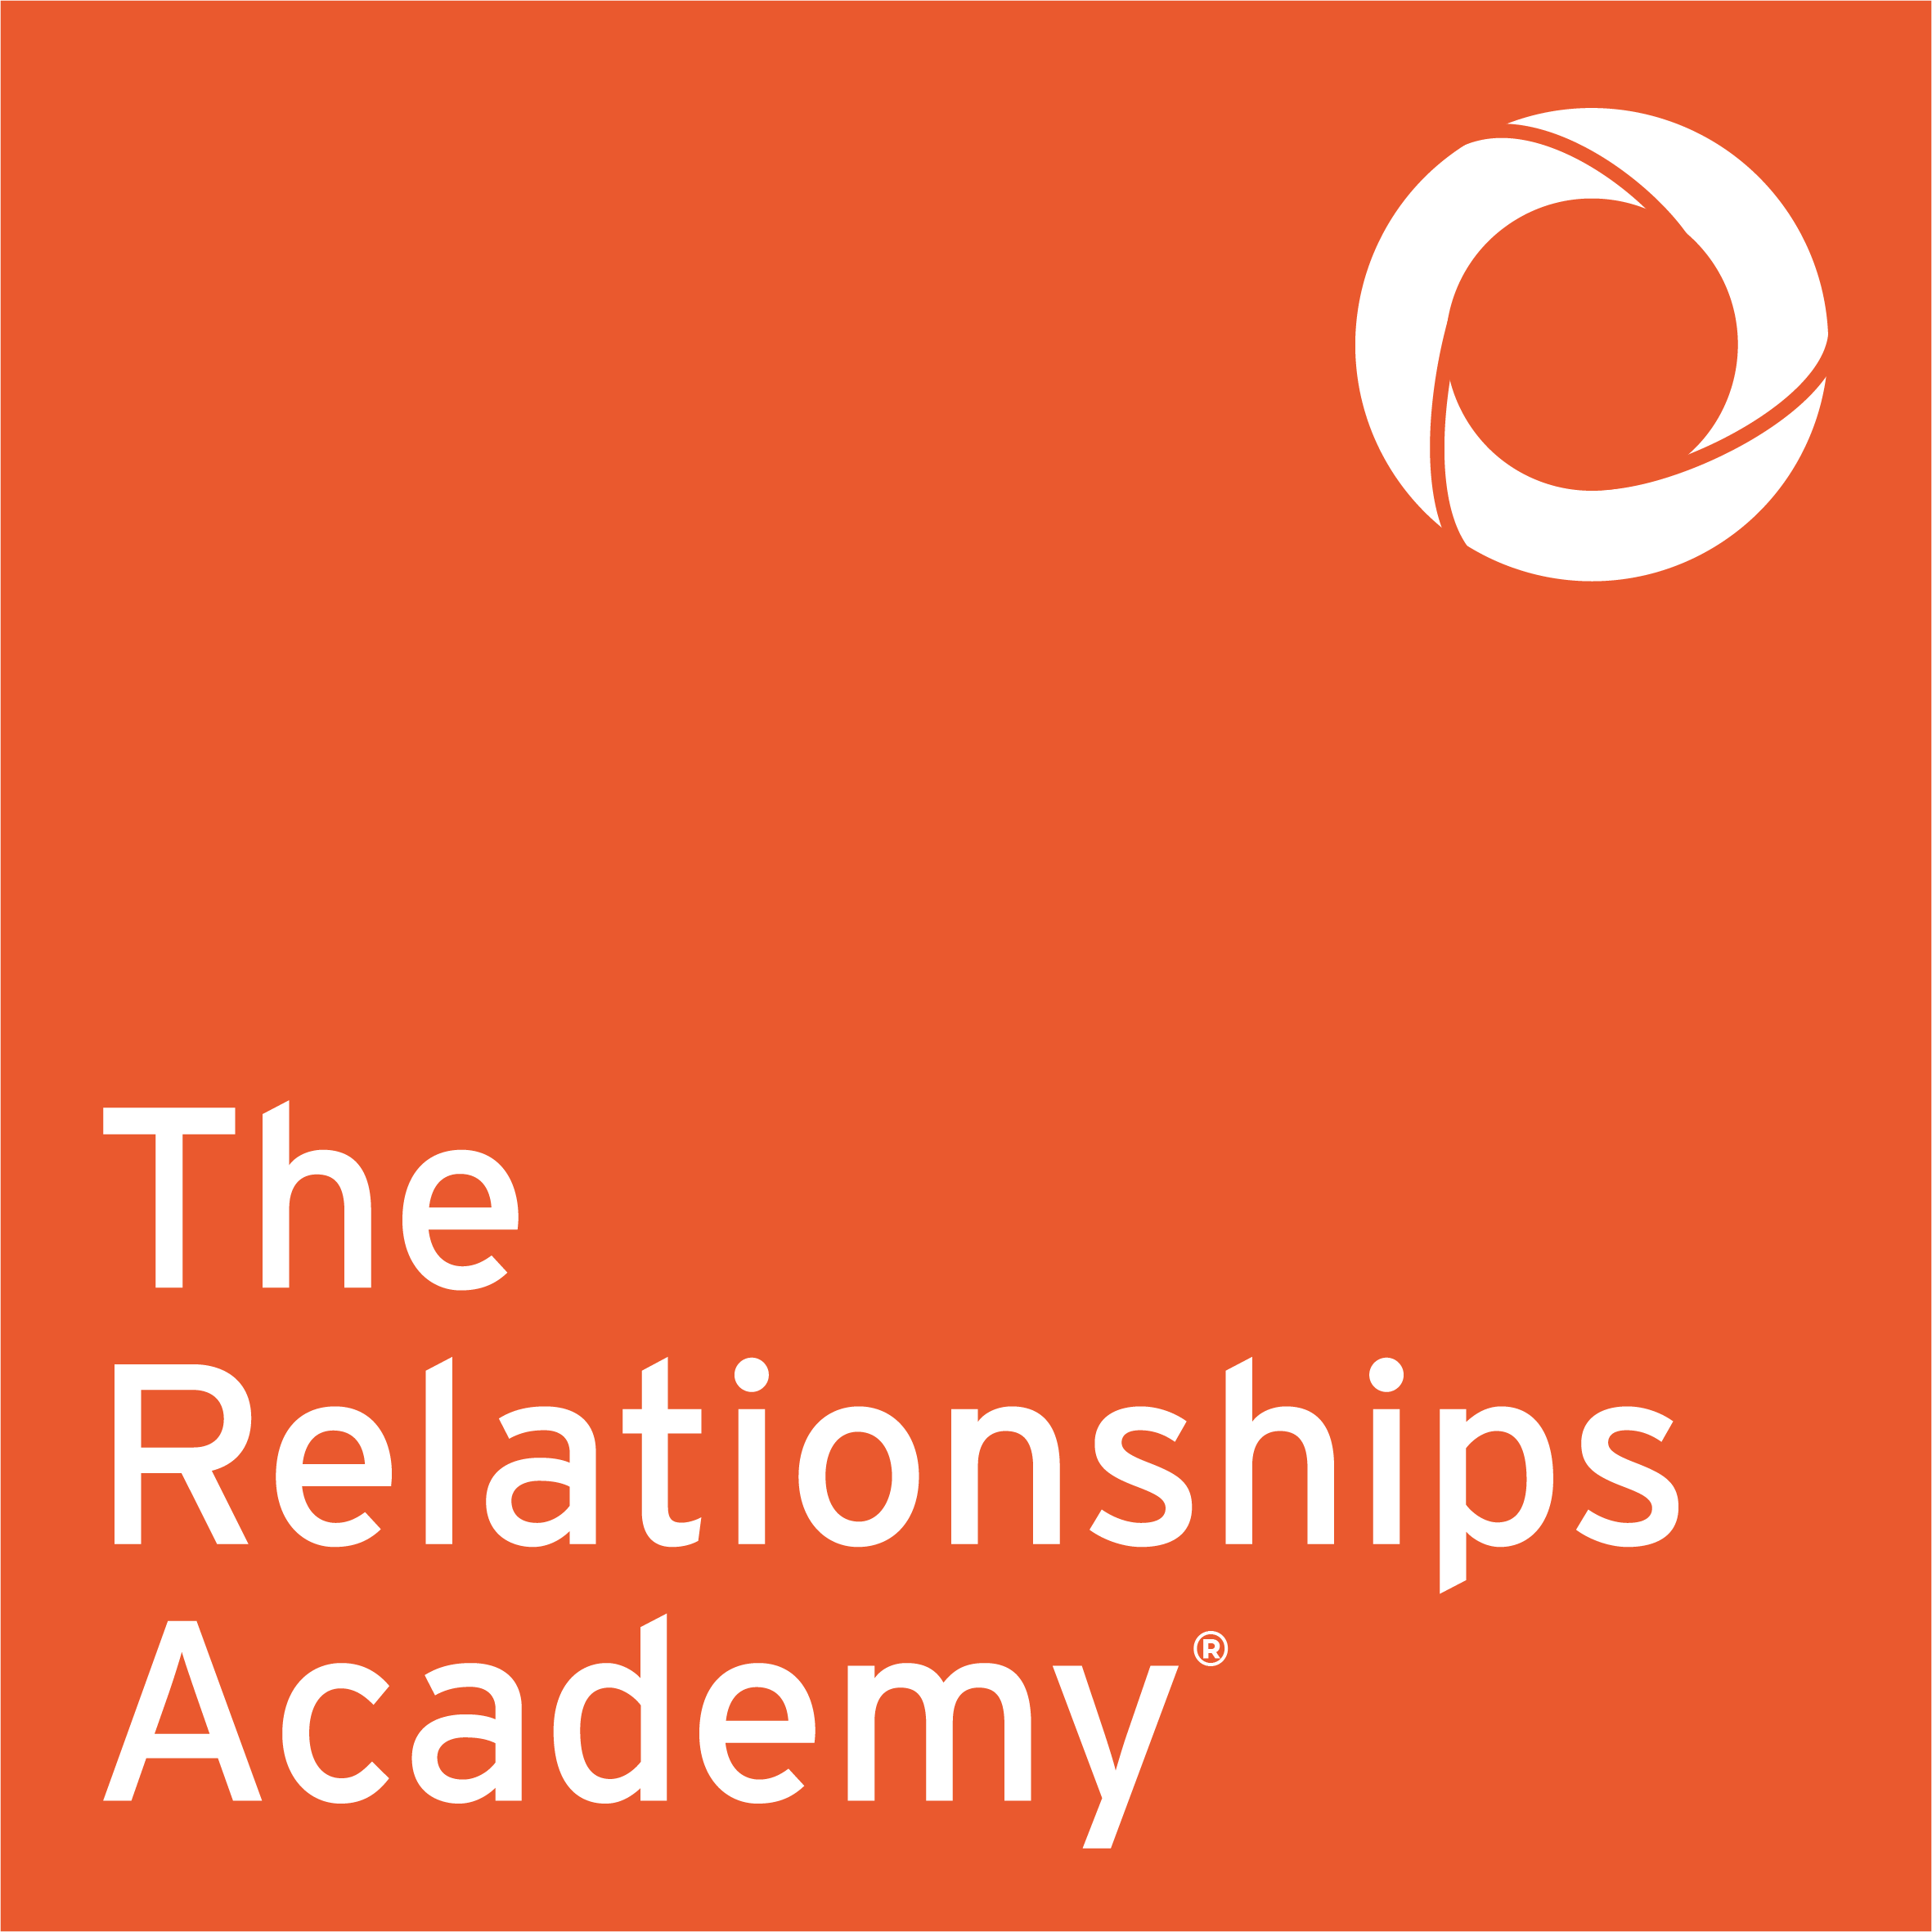 The Relationships Academy